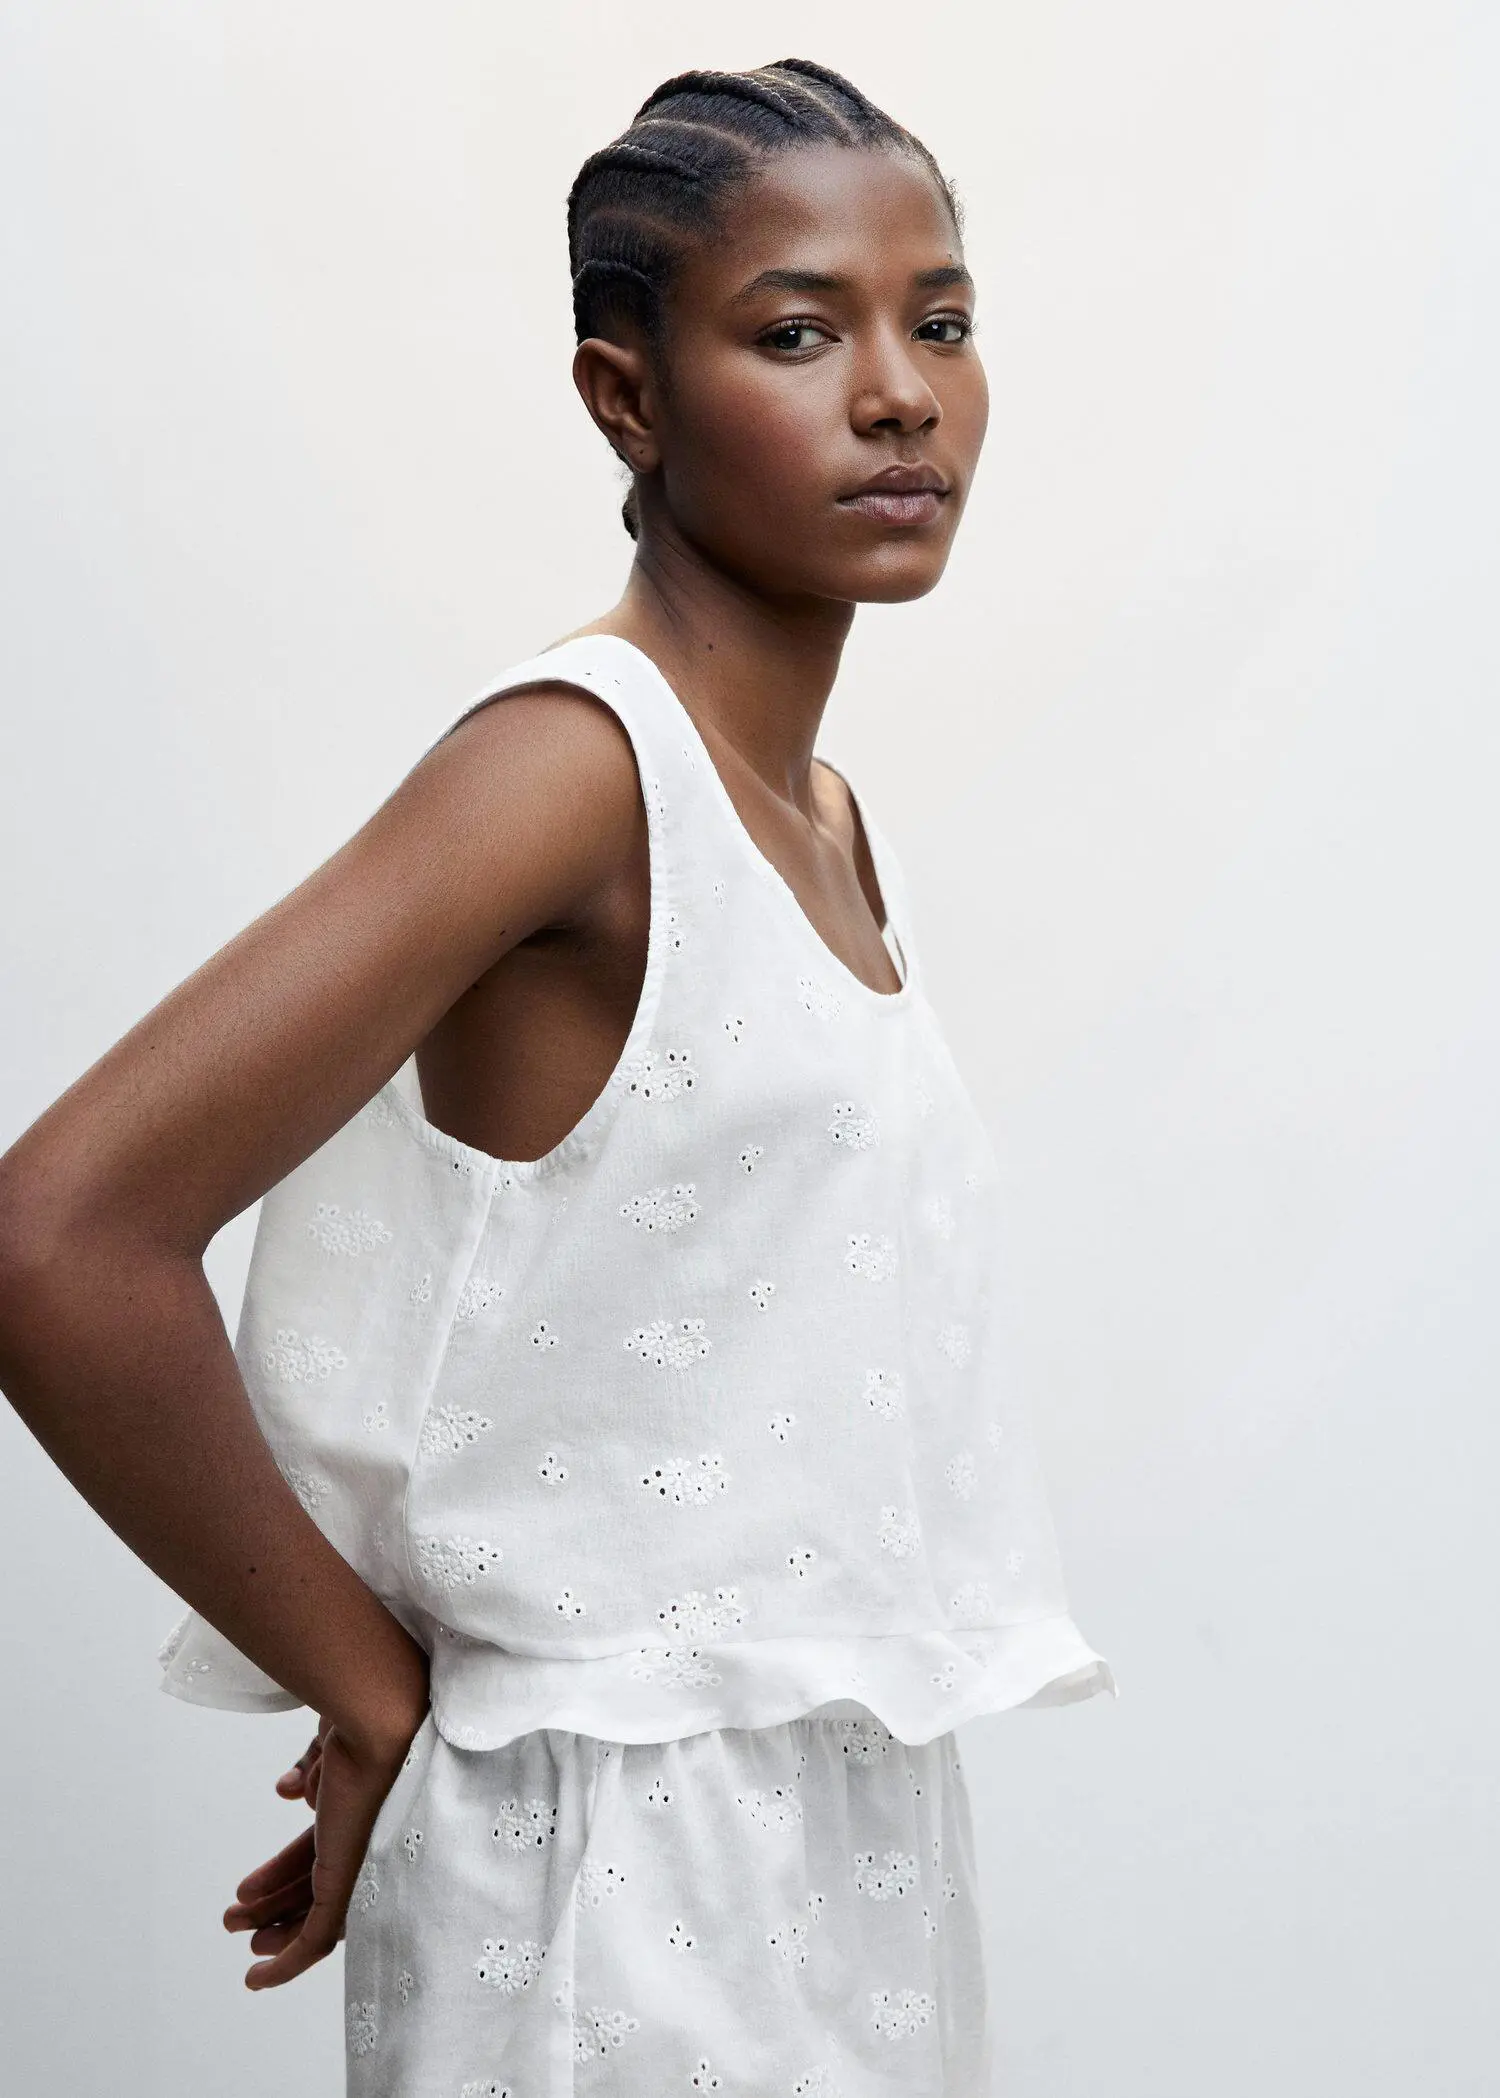 Mango Pyjama top with openwork details. a woman wearing a white top and white shorts. 